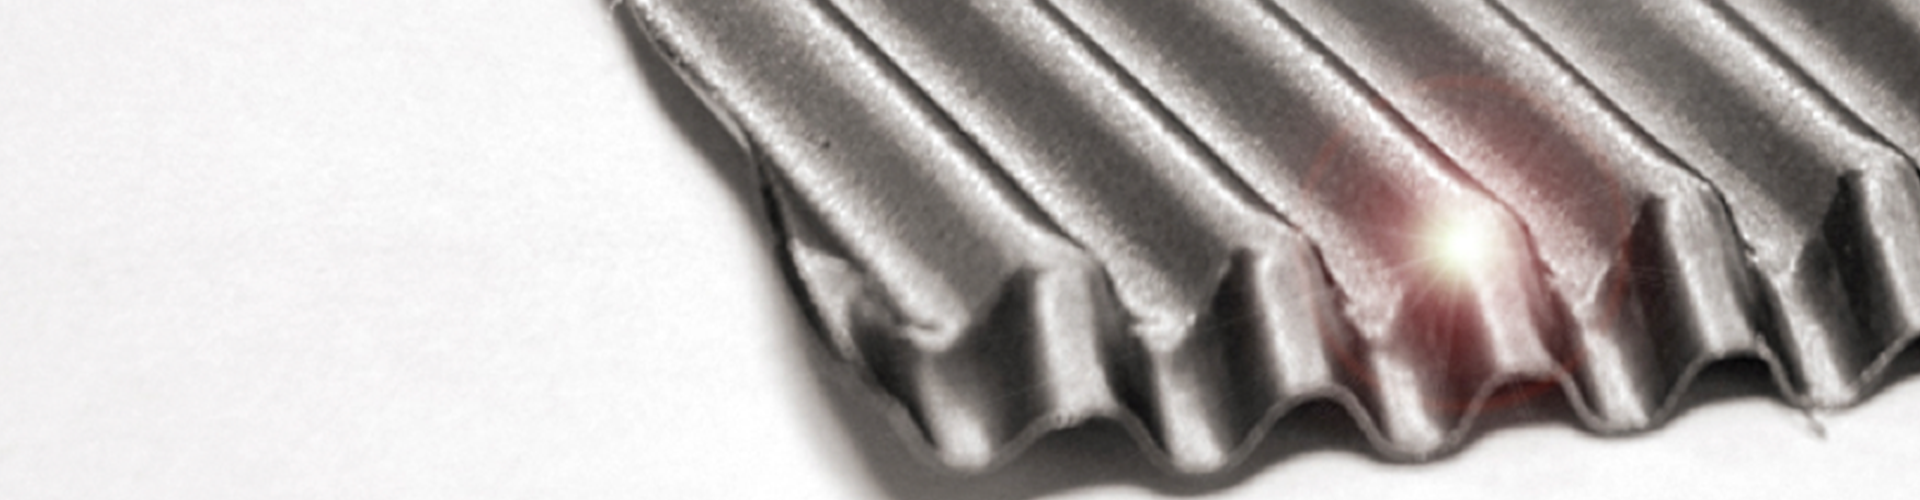 Metal substrates by Excalibre Technologies